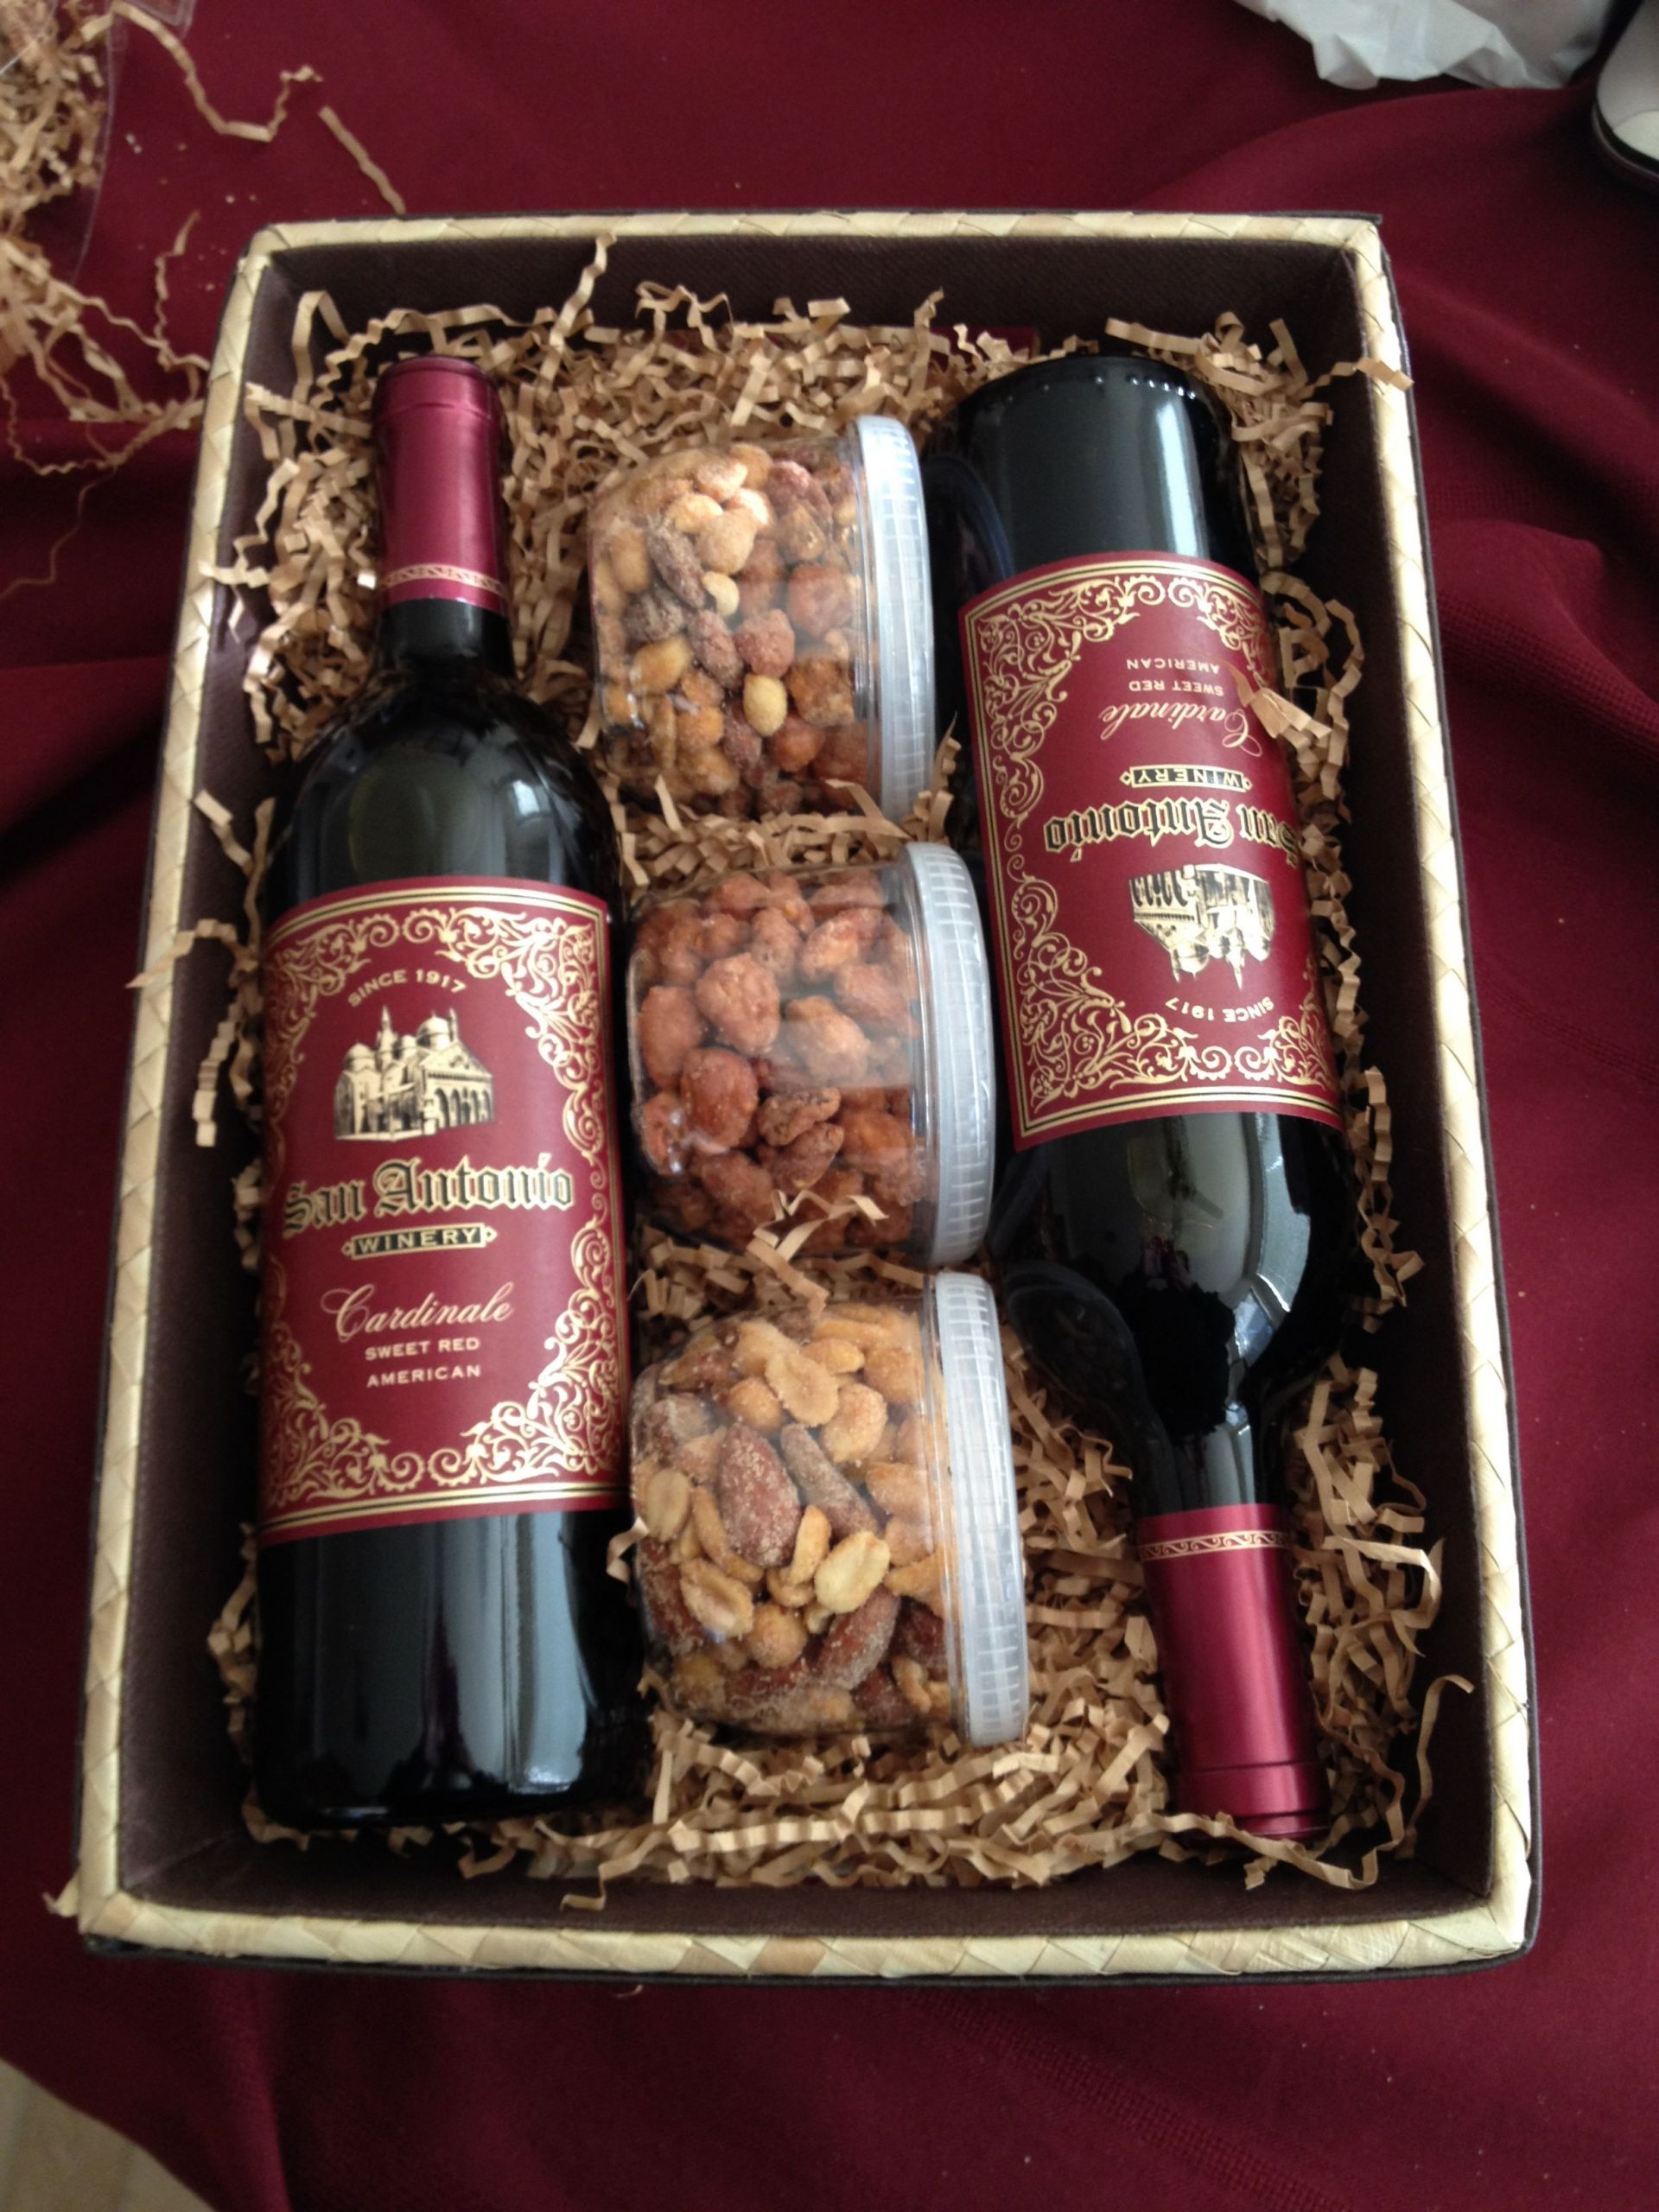 DIY Wine Gift Baskets Ideas
 Wine Gift Basket Nuts are a good idea to add to the wine